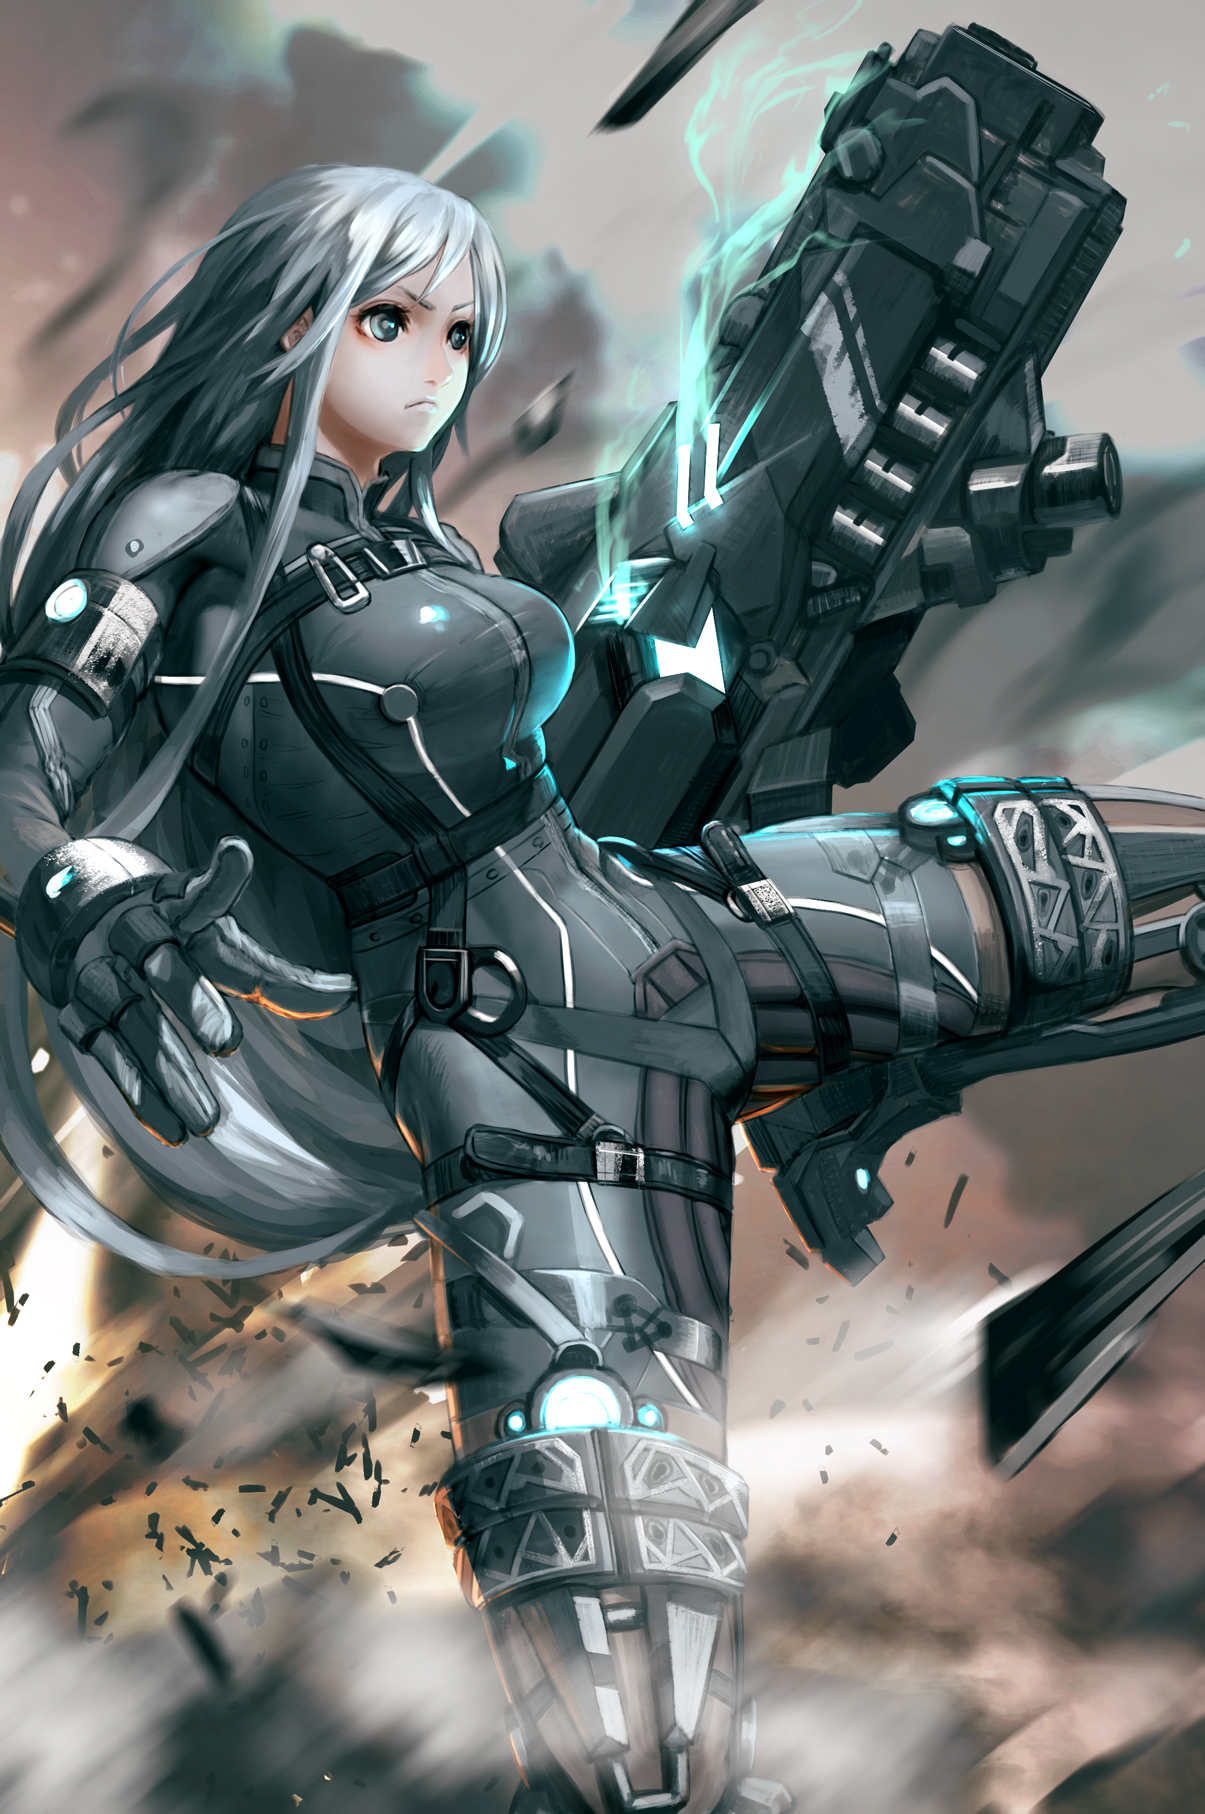 Lexica - a anime girl cropped with a sword made of gold and half chest armor  in silver color